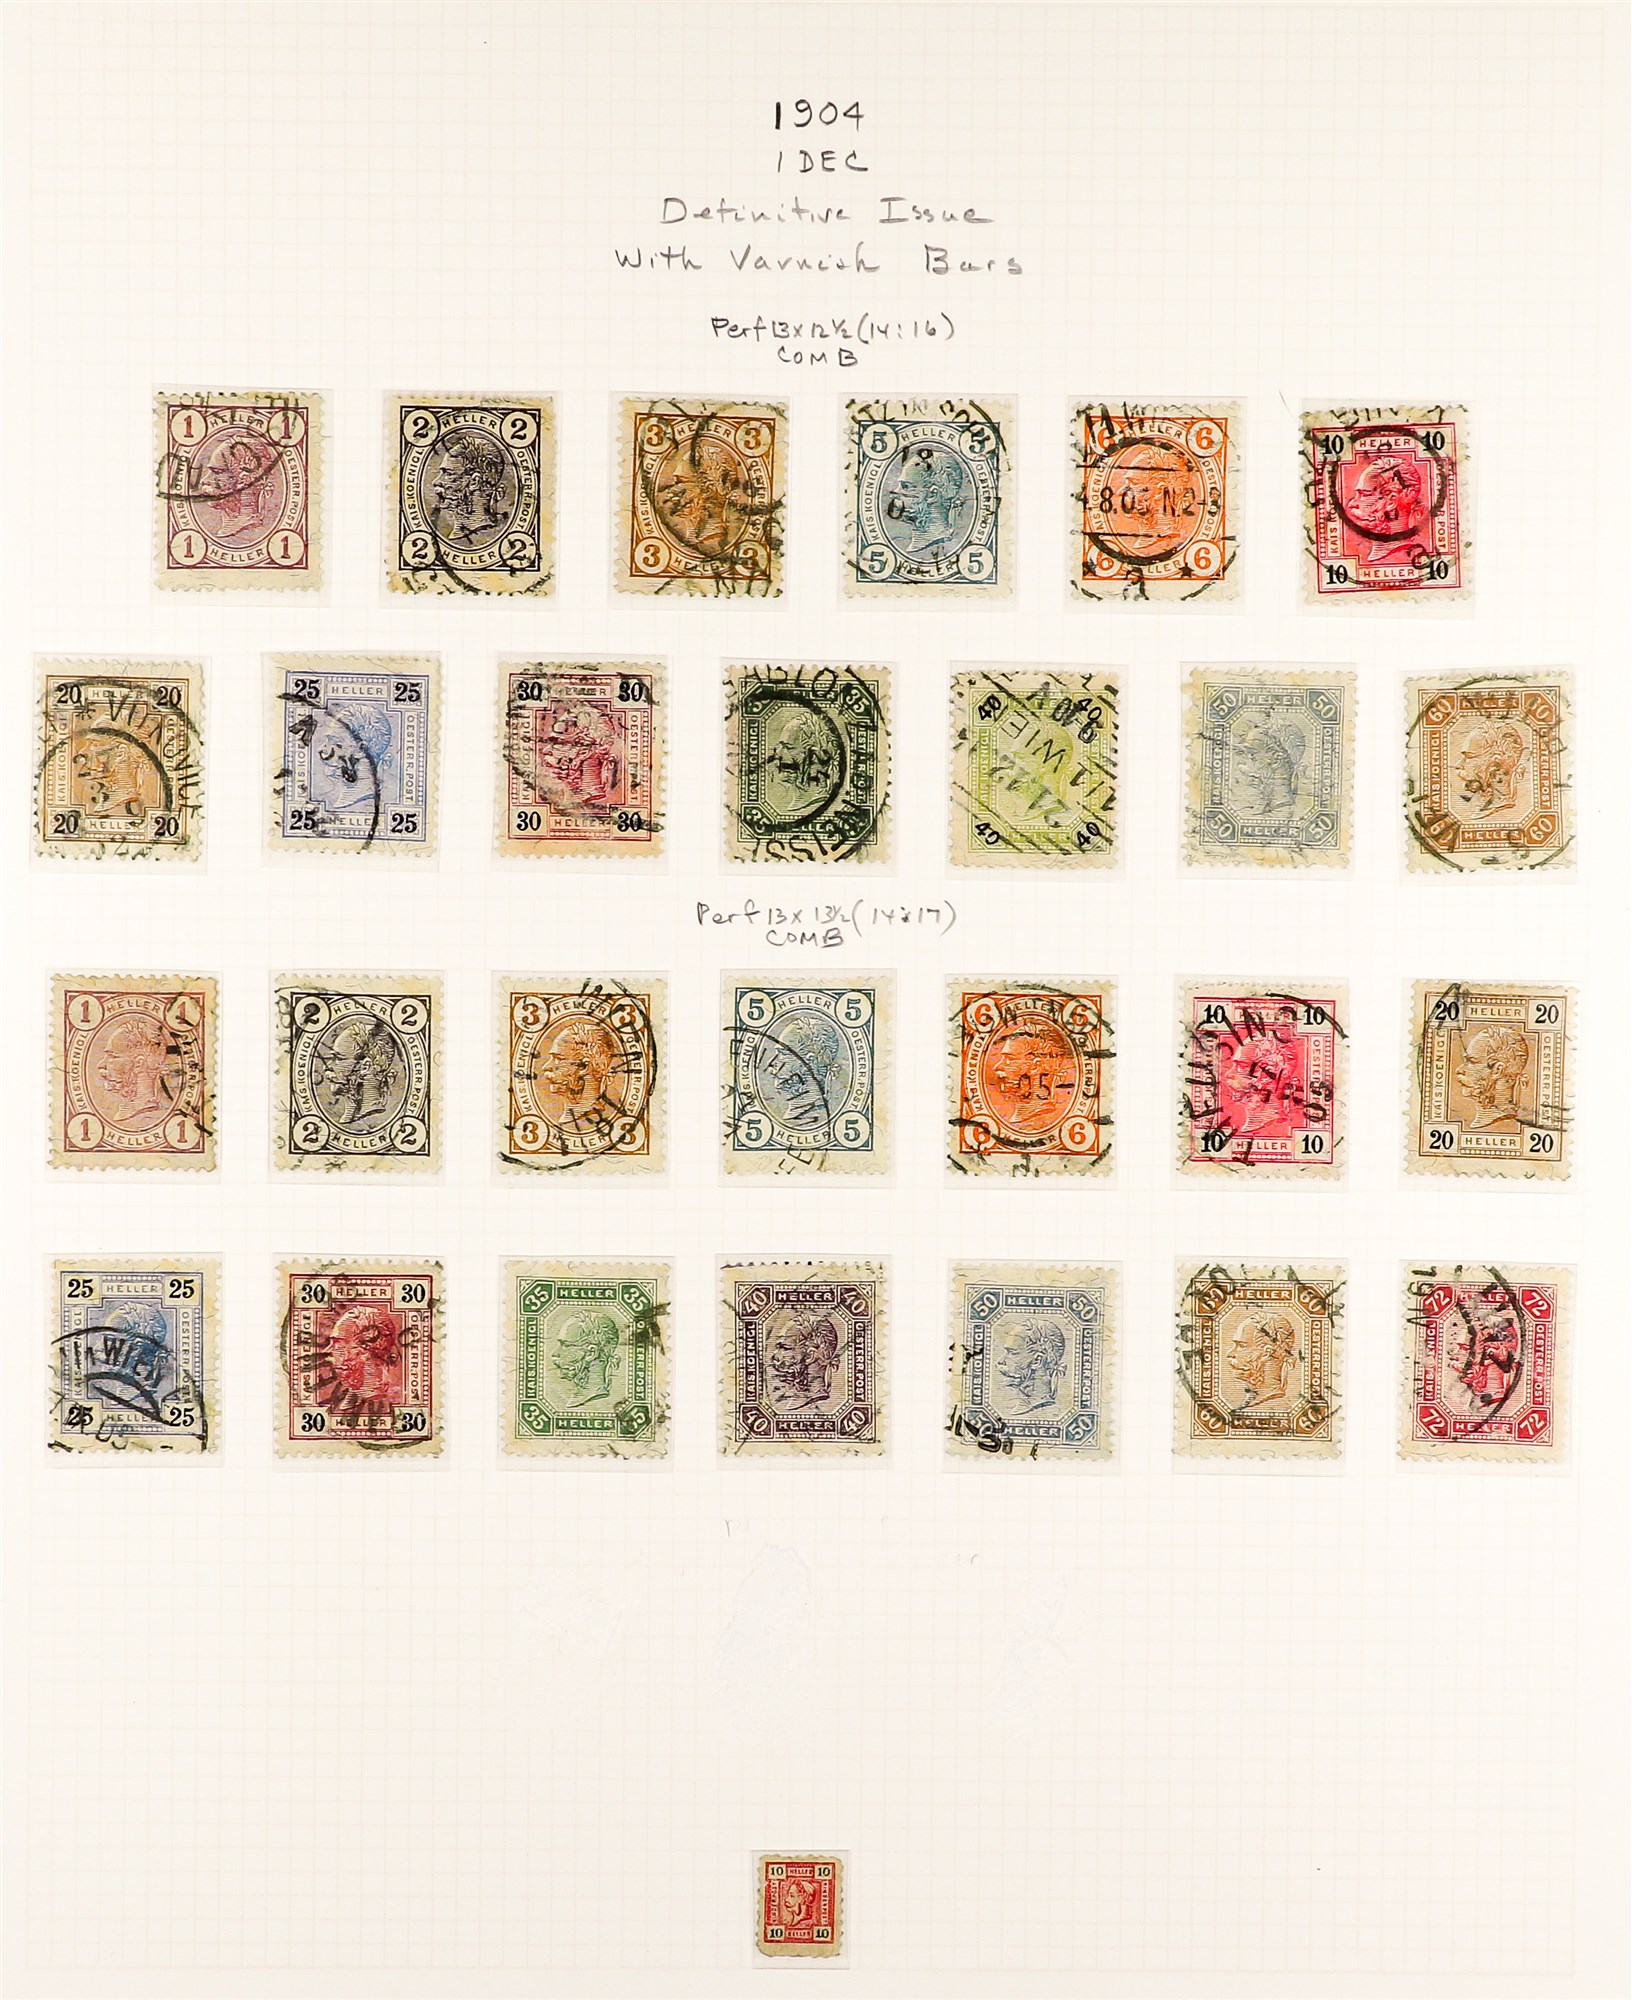 AUSTRIA 1890 - 1907 FRANZ JOSEF DEFINITIVES collection of over 300 stamps on album pages, semi- - Image 12 of 13